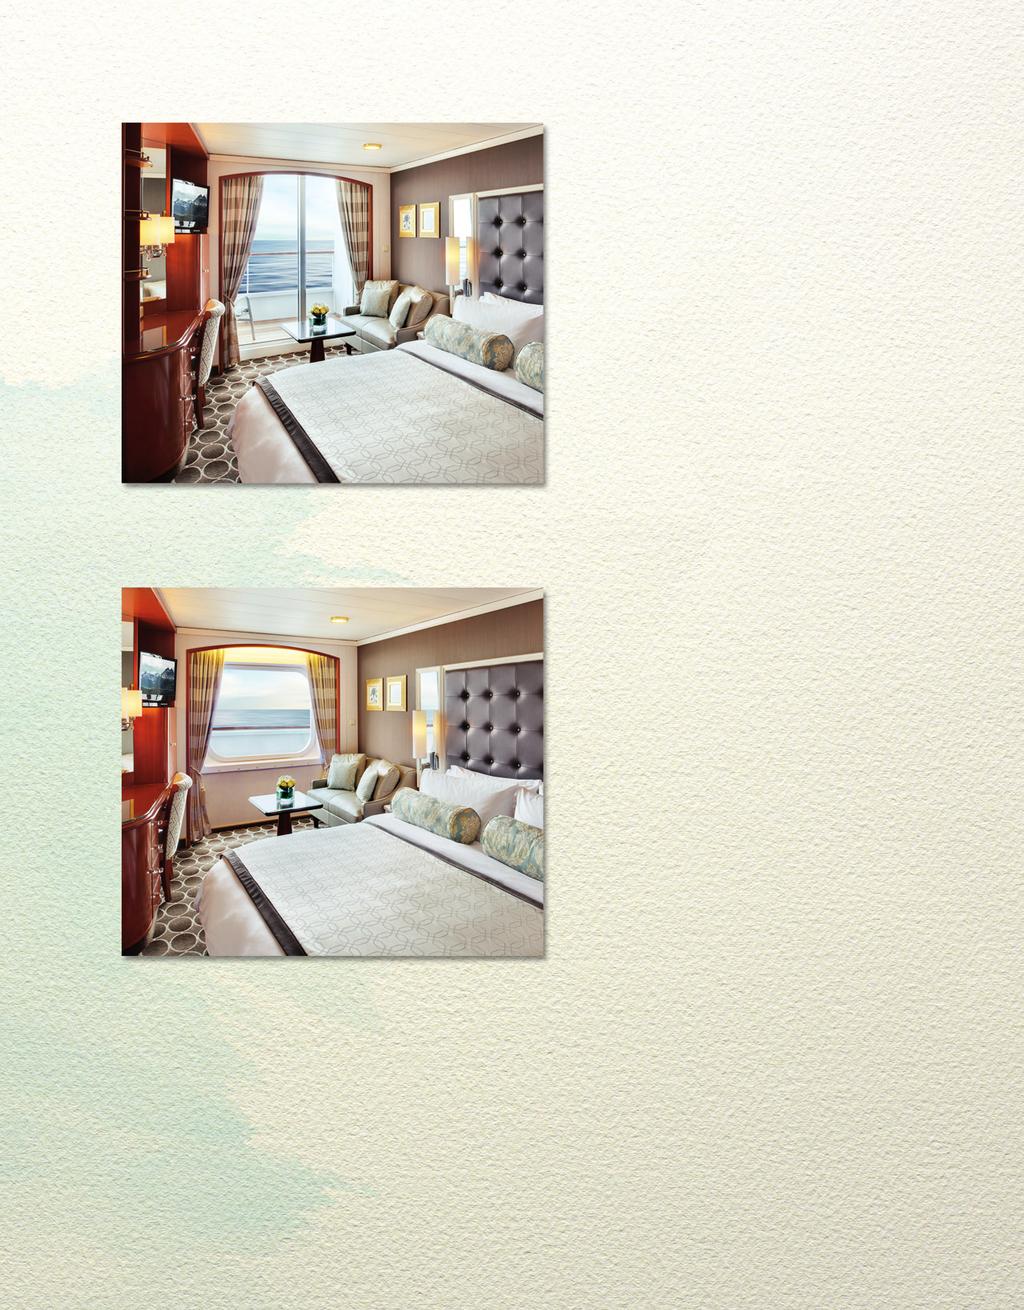 A B DEUXE STATEROOM WITH VERANDAH 269 sq. ft.